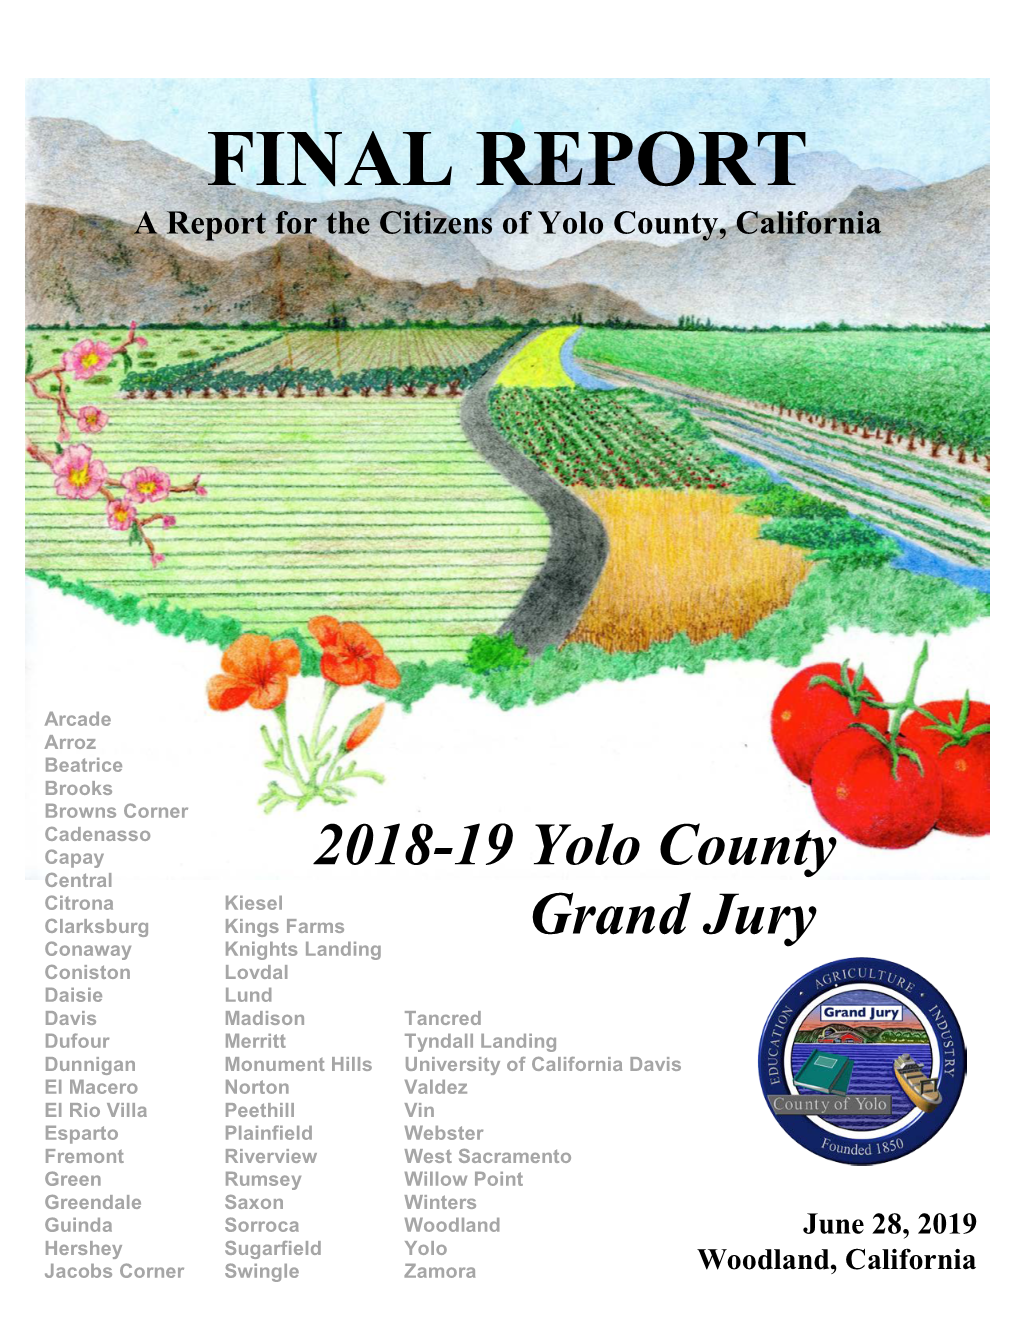 A Report for the Citizens of Yolo County, California